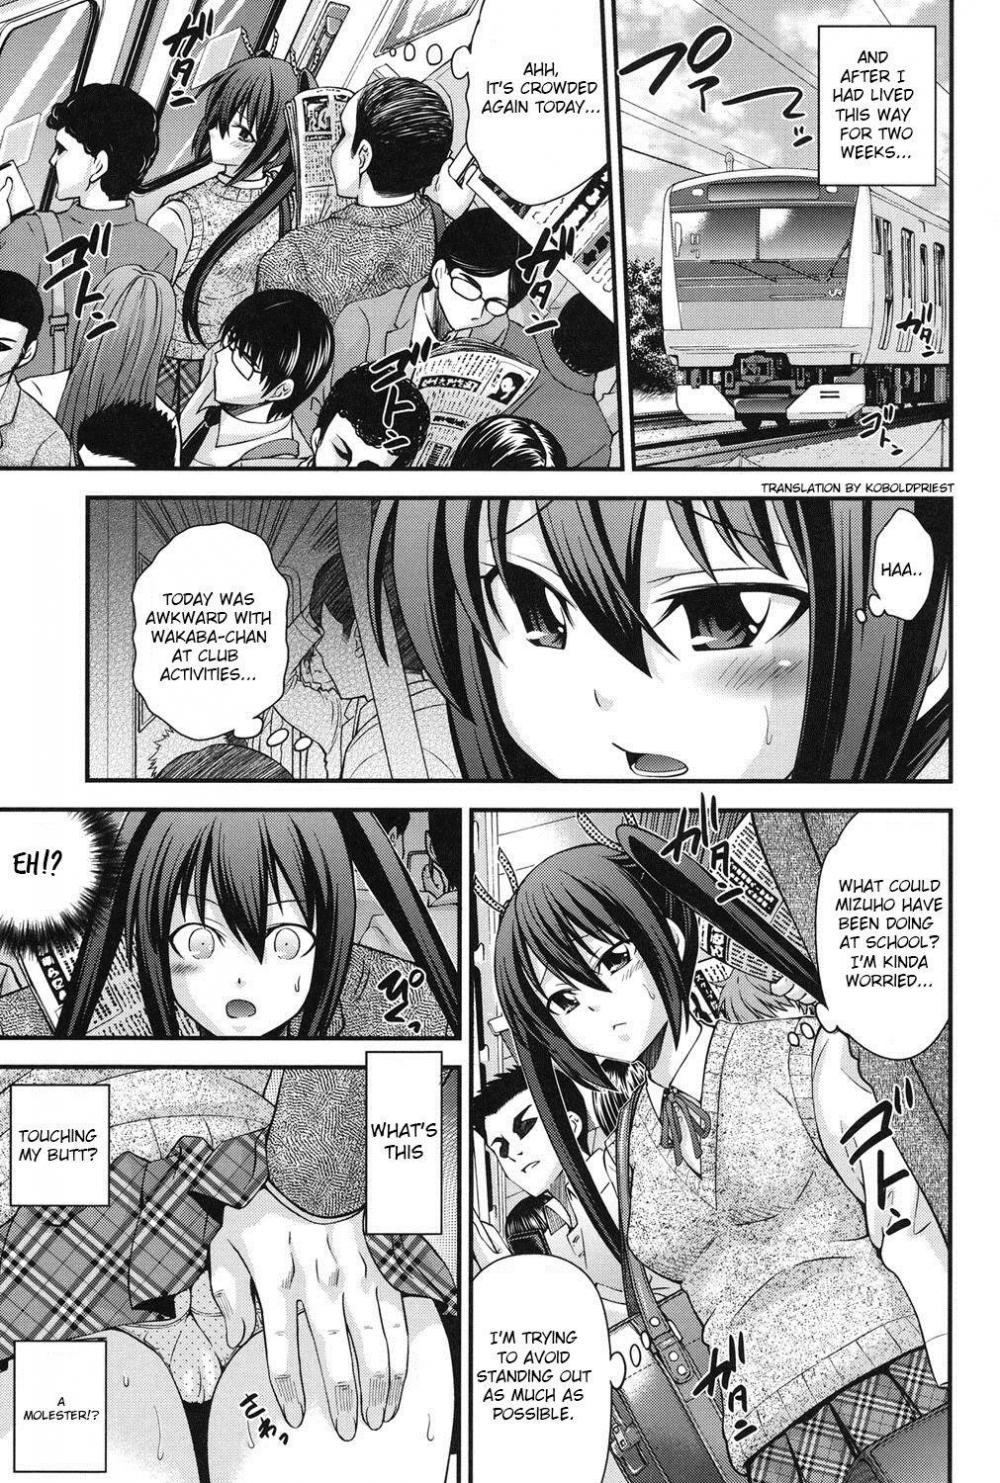 Hentai Manga Comic-Ani to Replace - Replace and Brother-Chapter 3-3